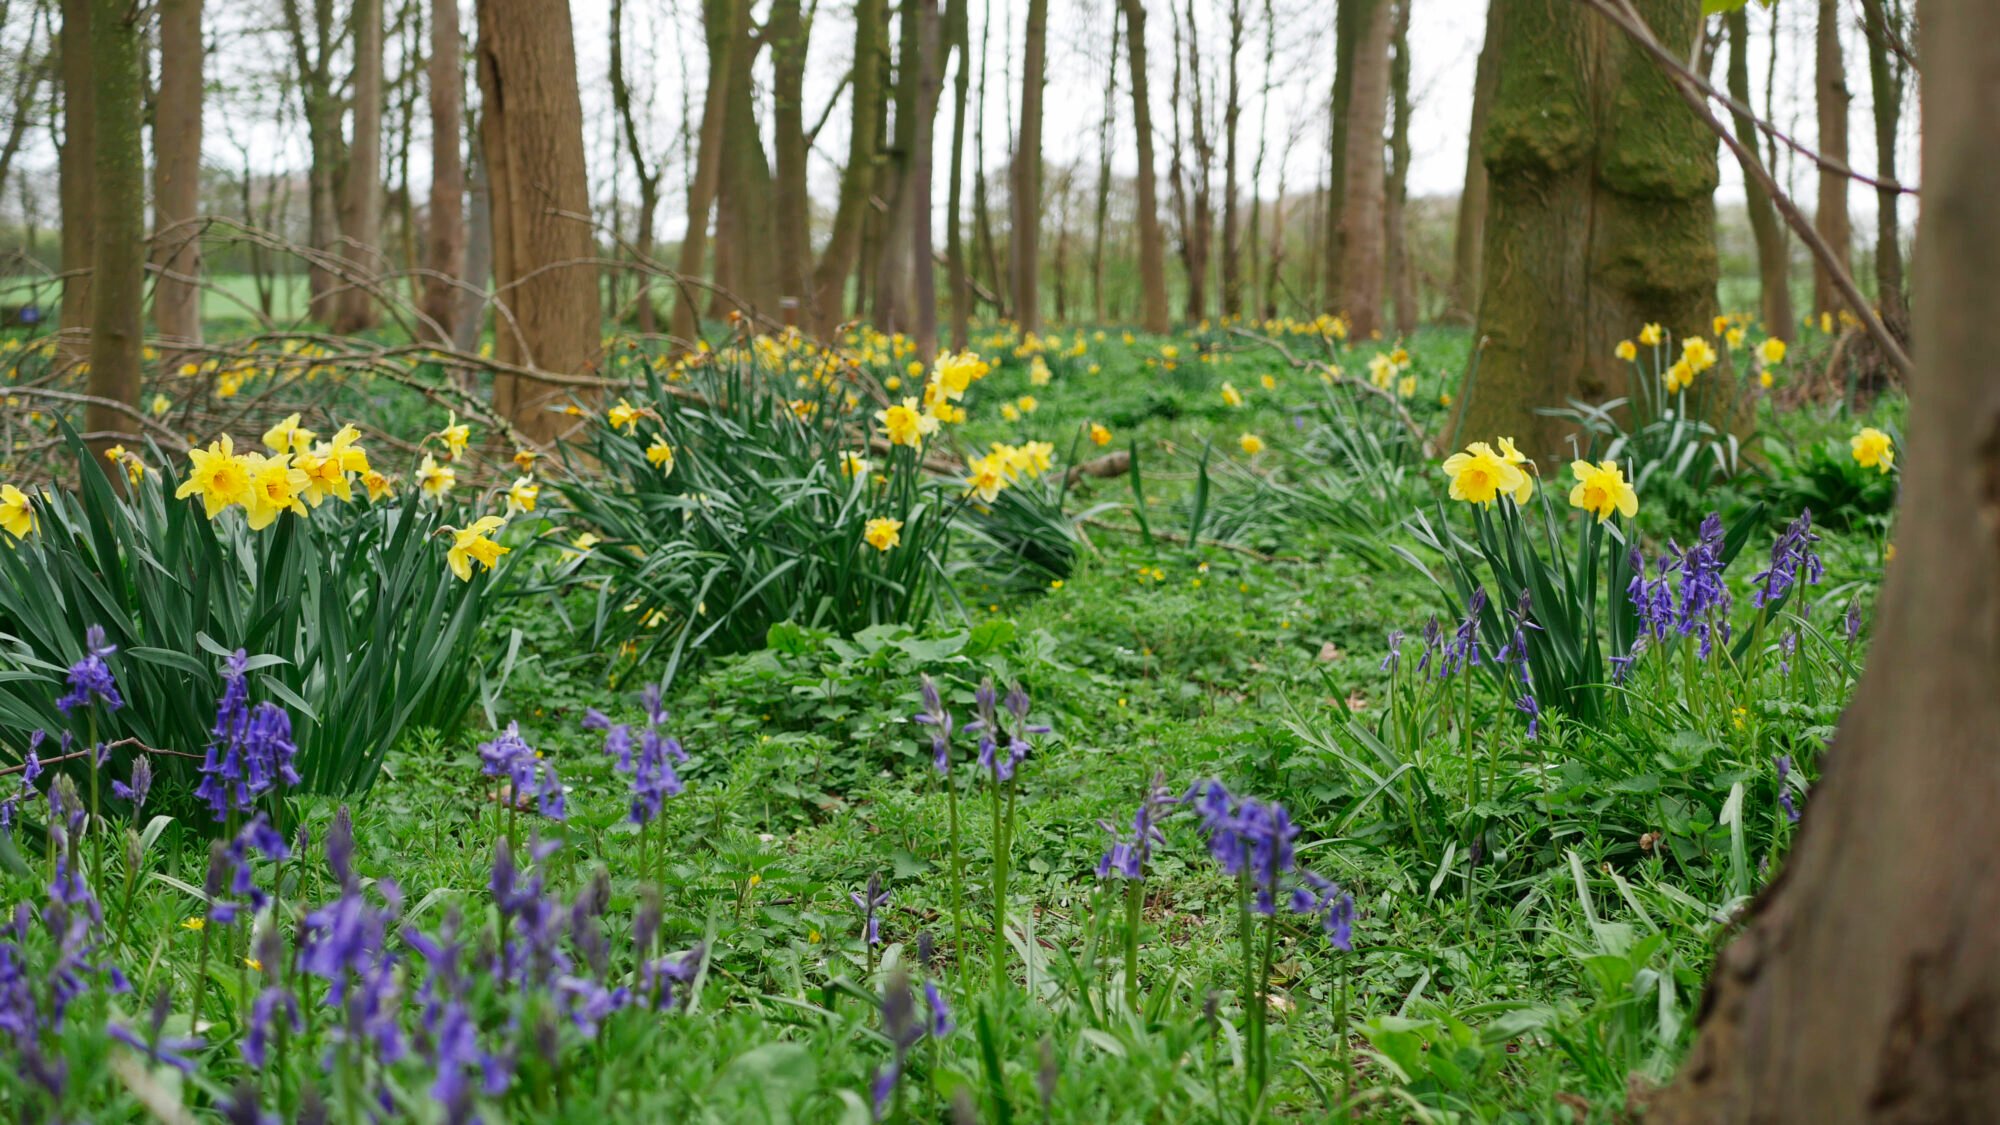 Image name daffodils at burton constable arboretum near hull the 9 image from the post Open Weekend @ Burton Constable Holiday Park & Arboretum in Yorkshire.com.